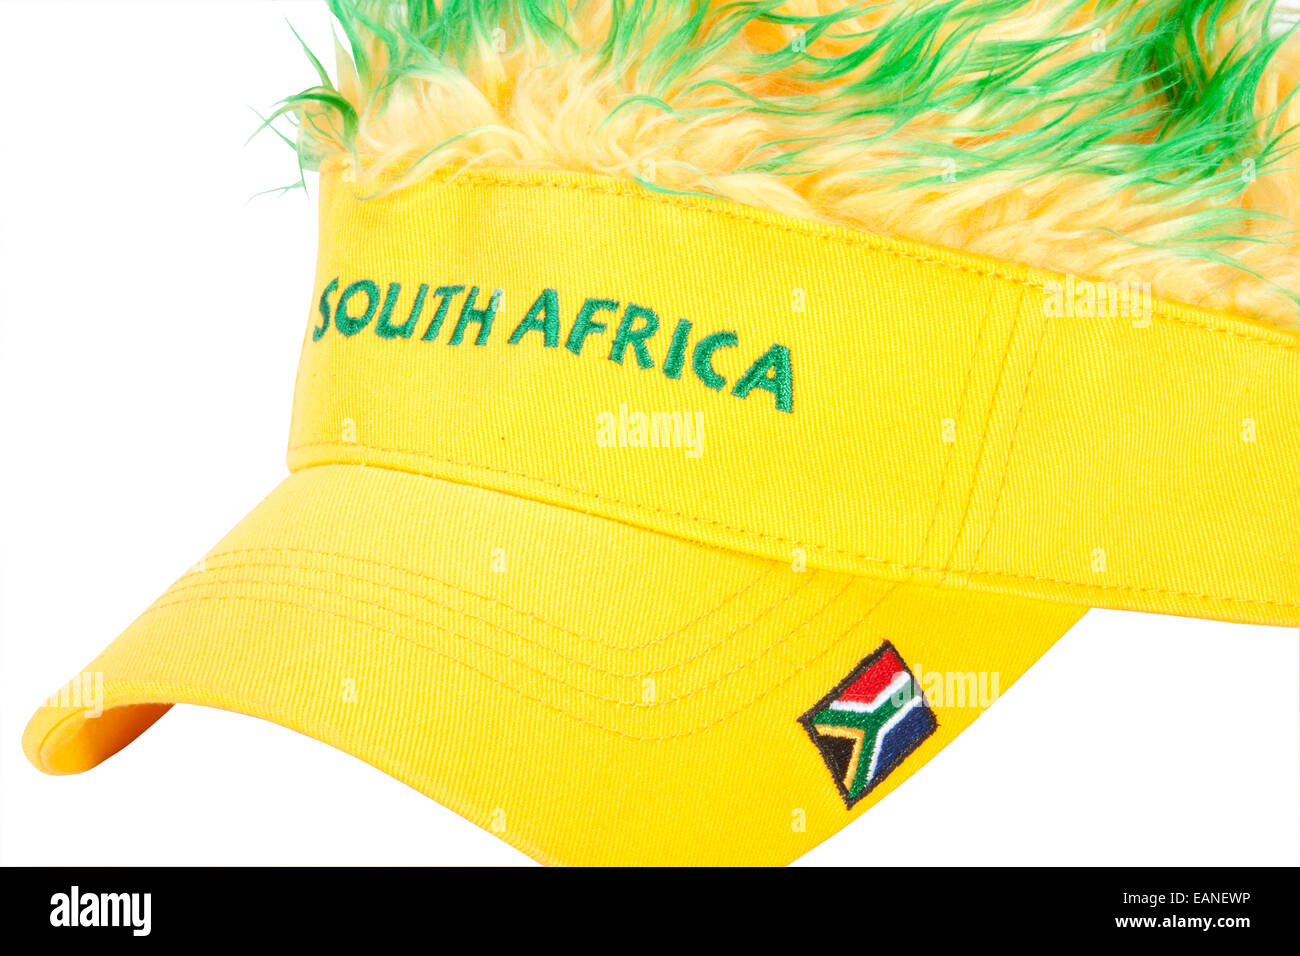 south African peak cap with flag and artificial hair Stock Photo